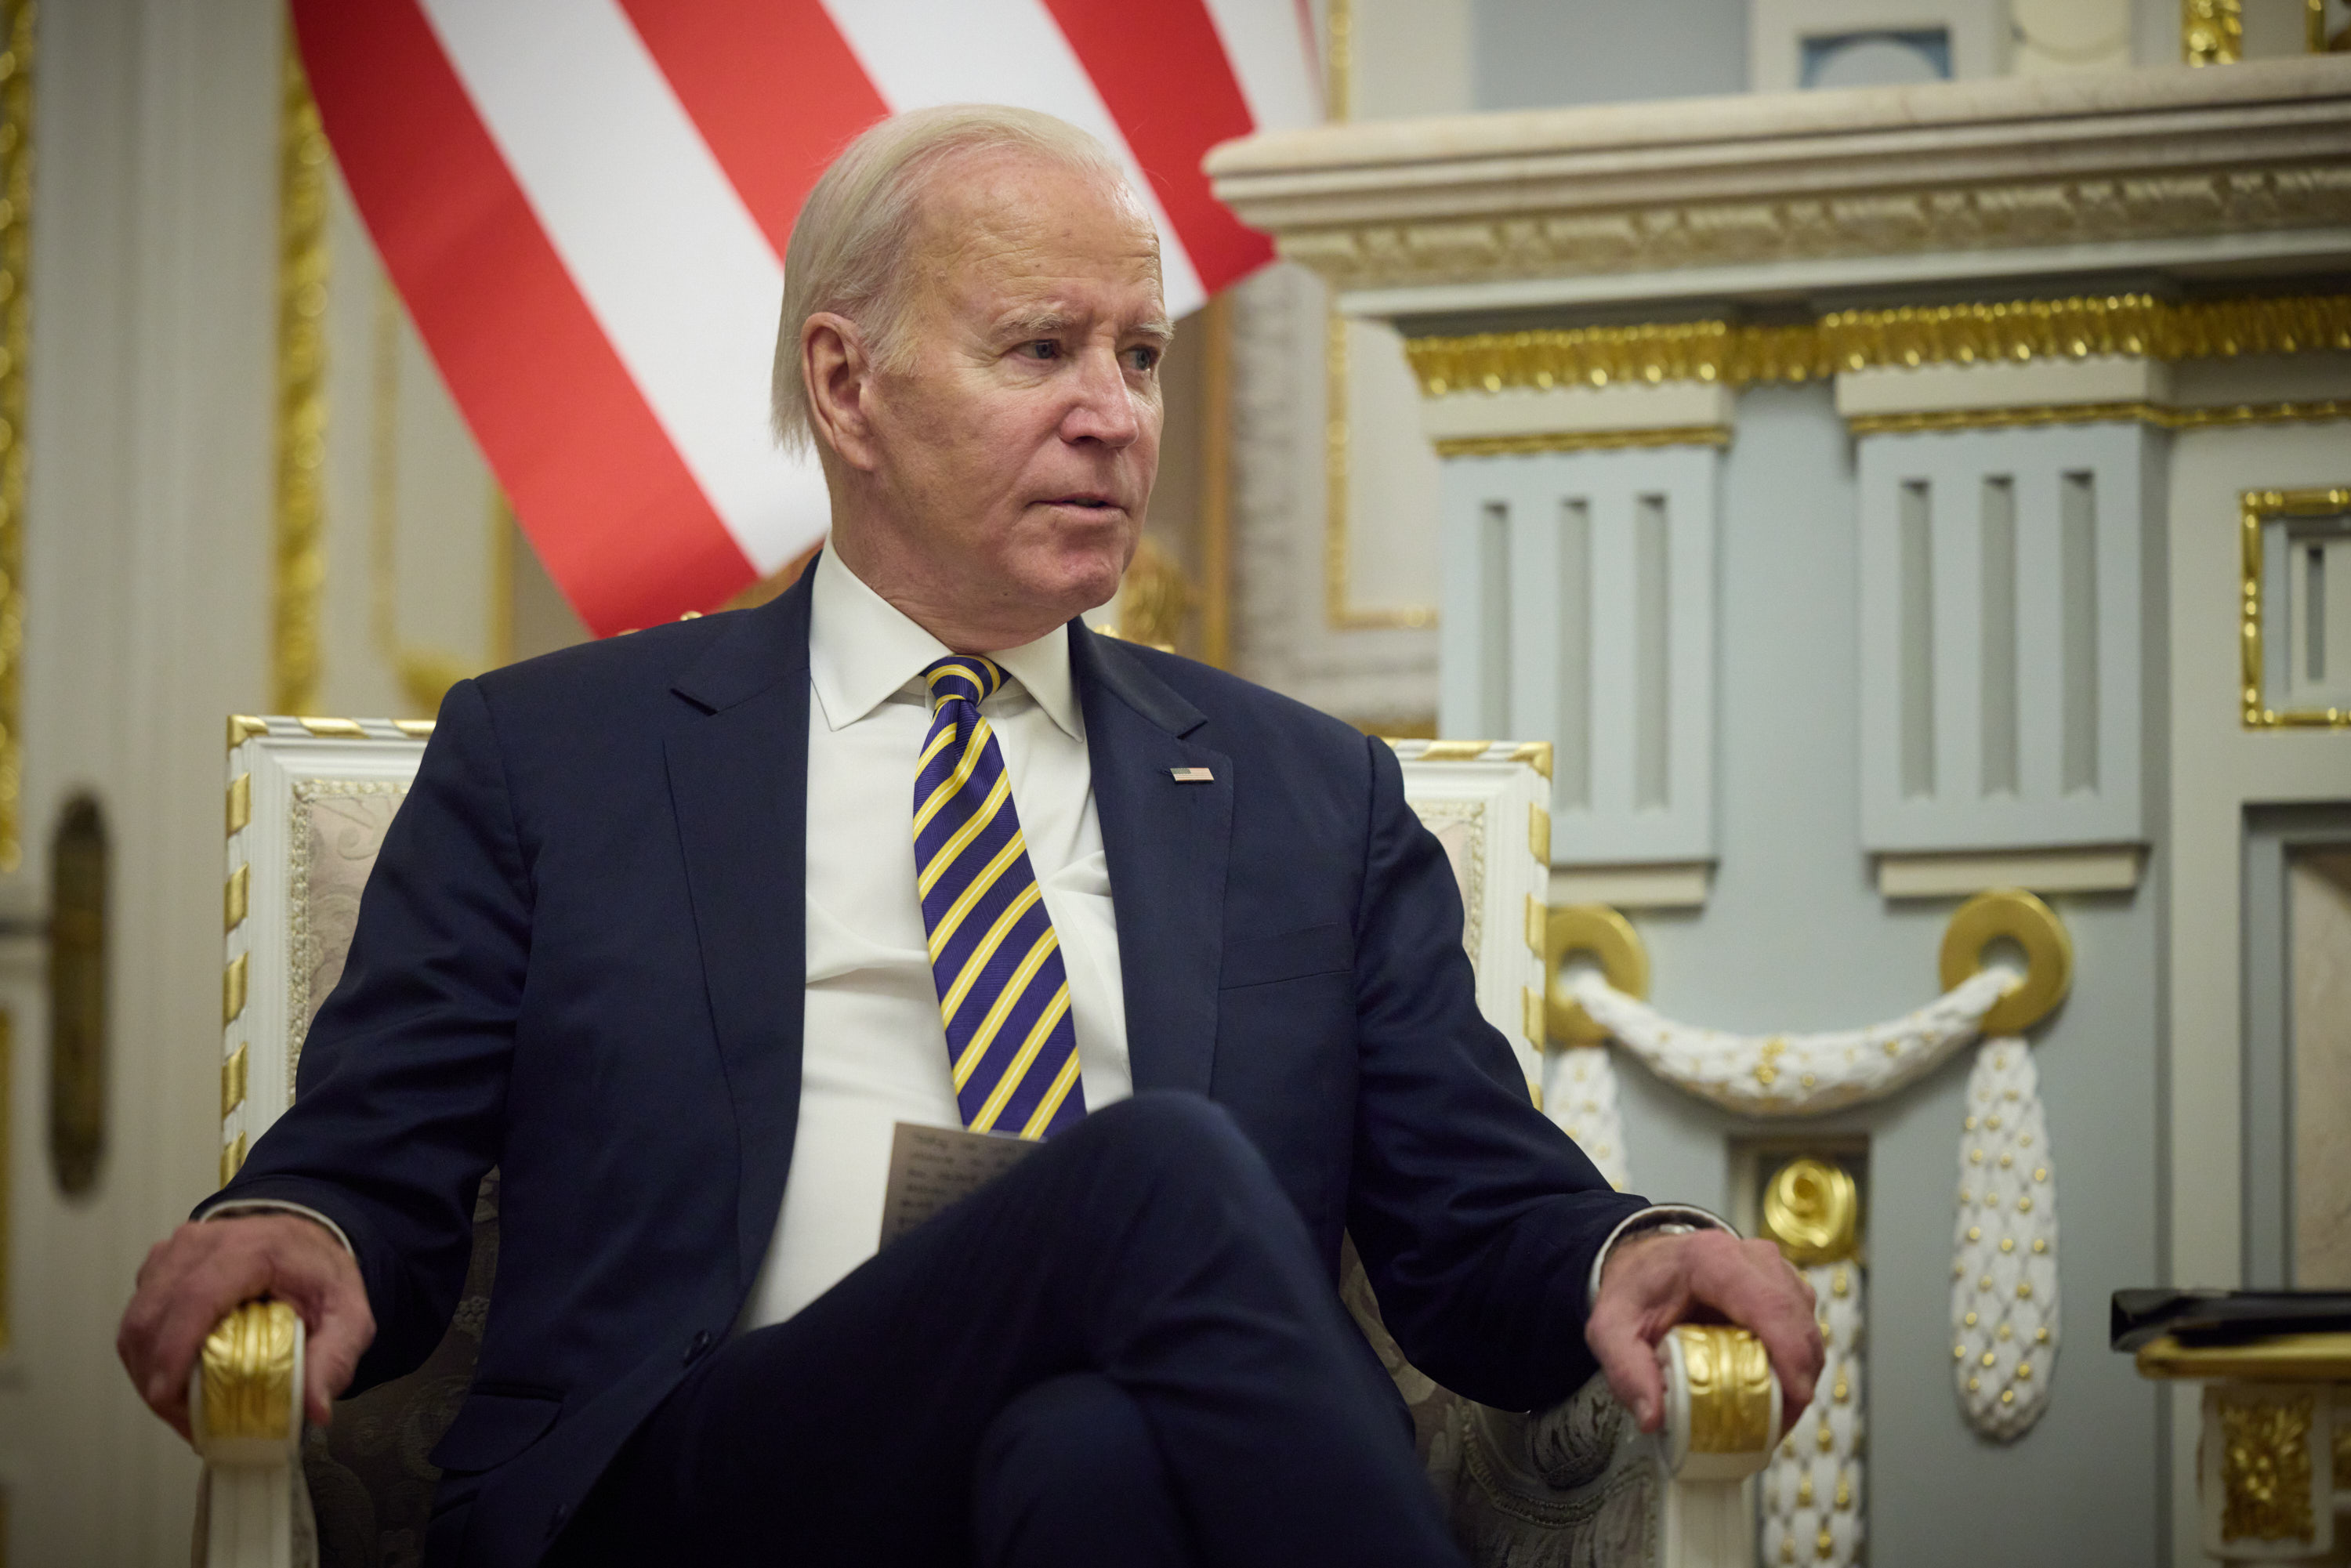 Biden to Require Chip Makers Getting Funds to Provide Child Care - Bloomberg